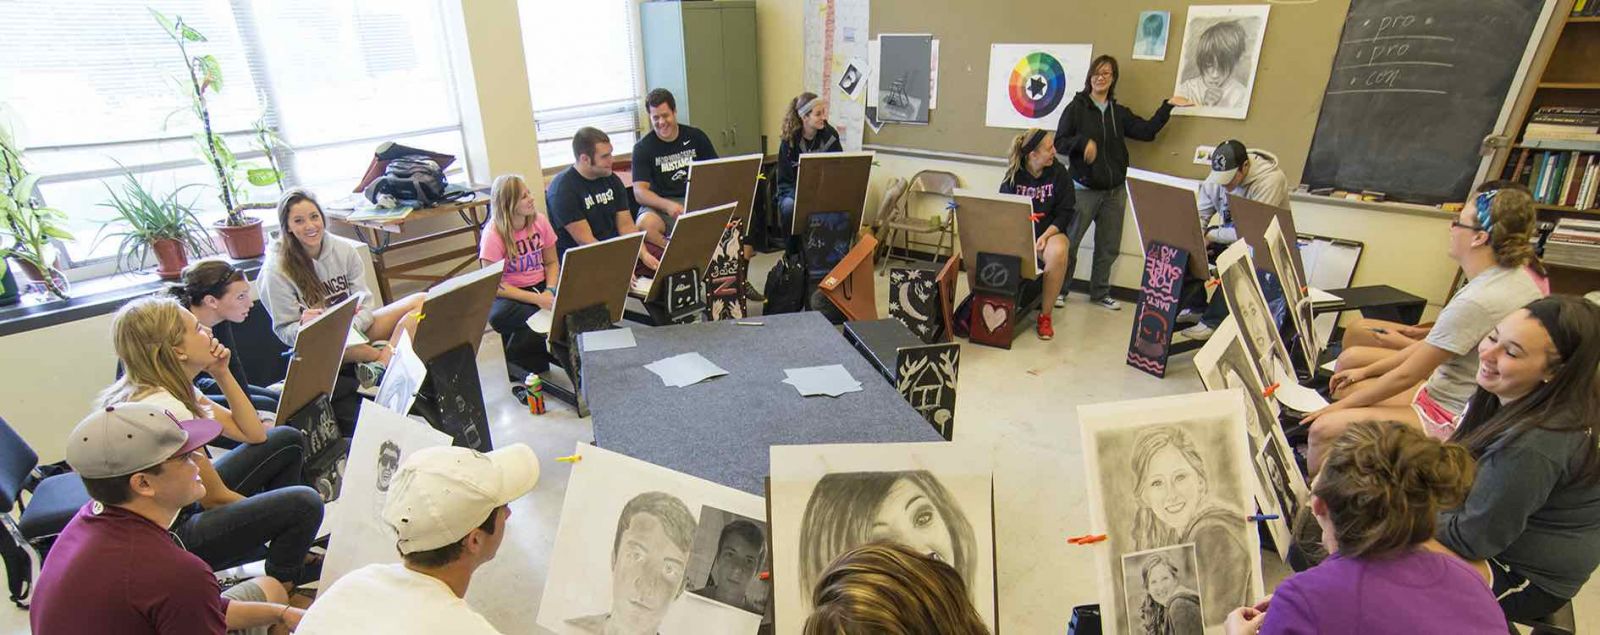 Drawing class at Morningside College